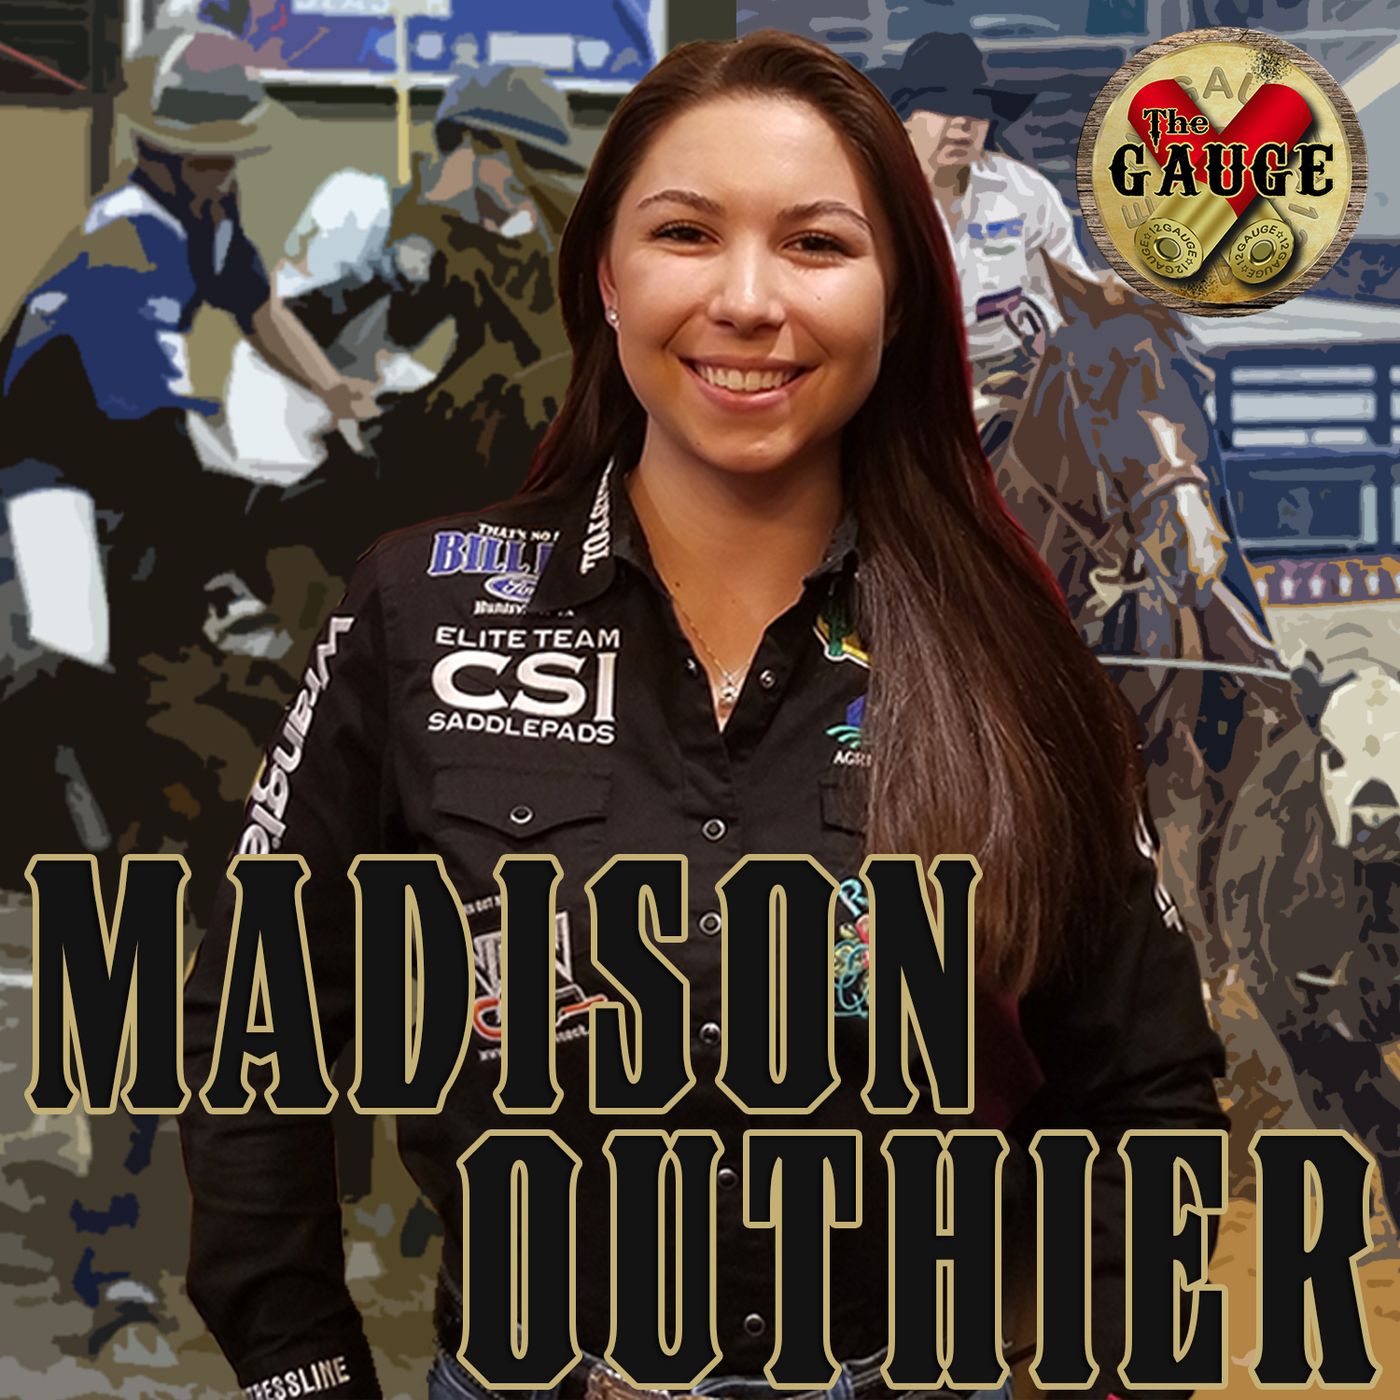 Madison Outhier